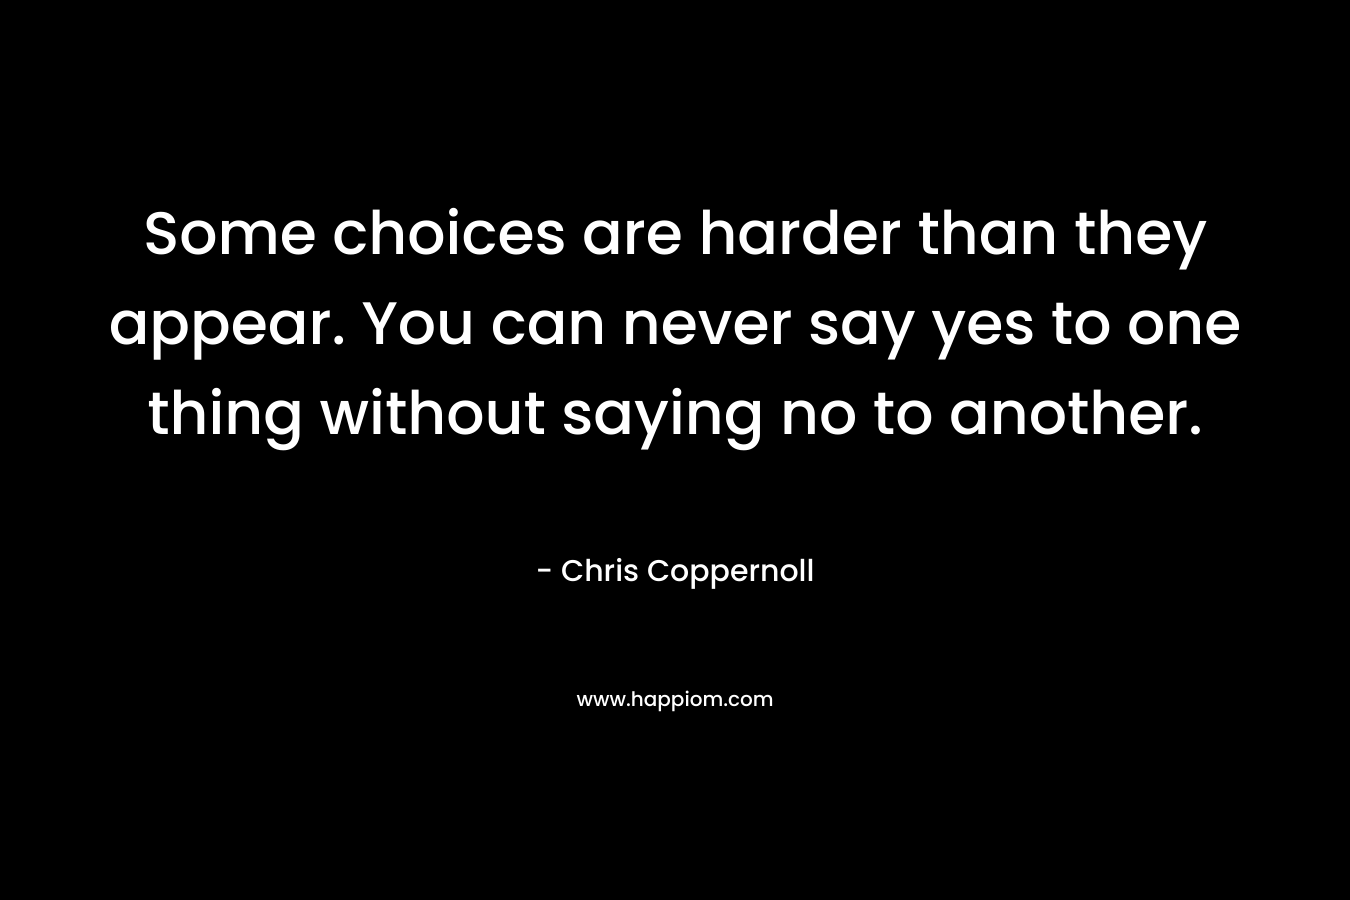 Some choices are harder than they appear. You can never say yes to one thing without saying no to another.